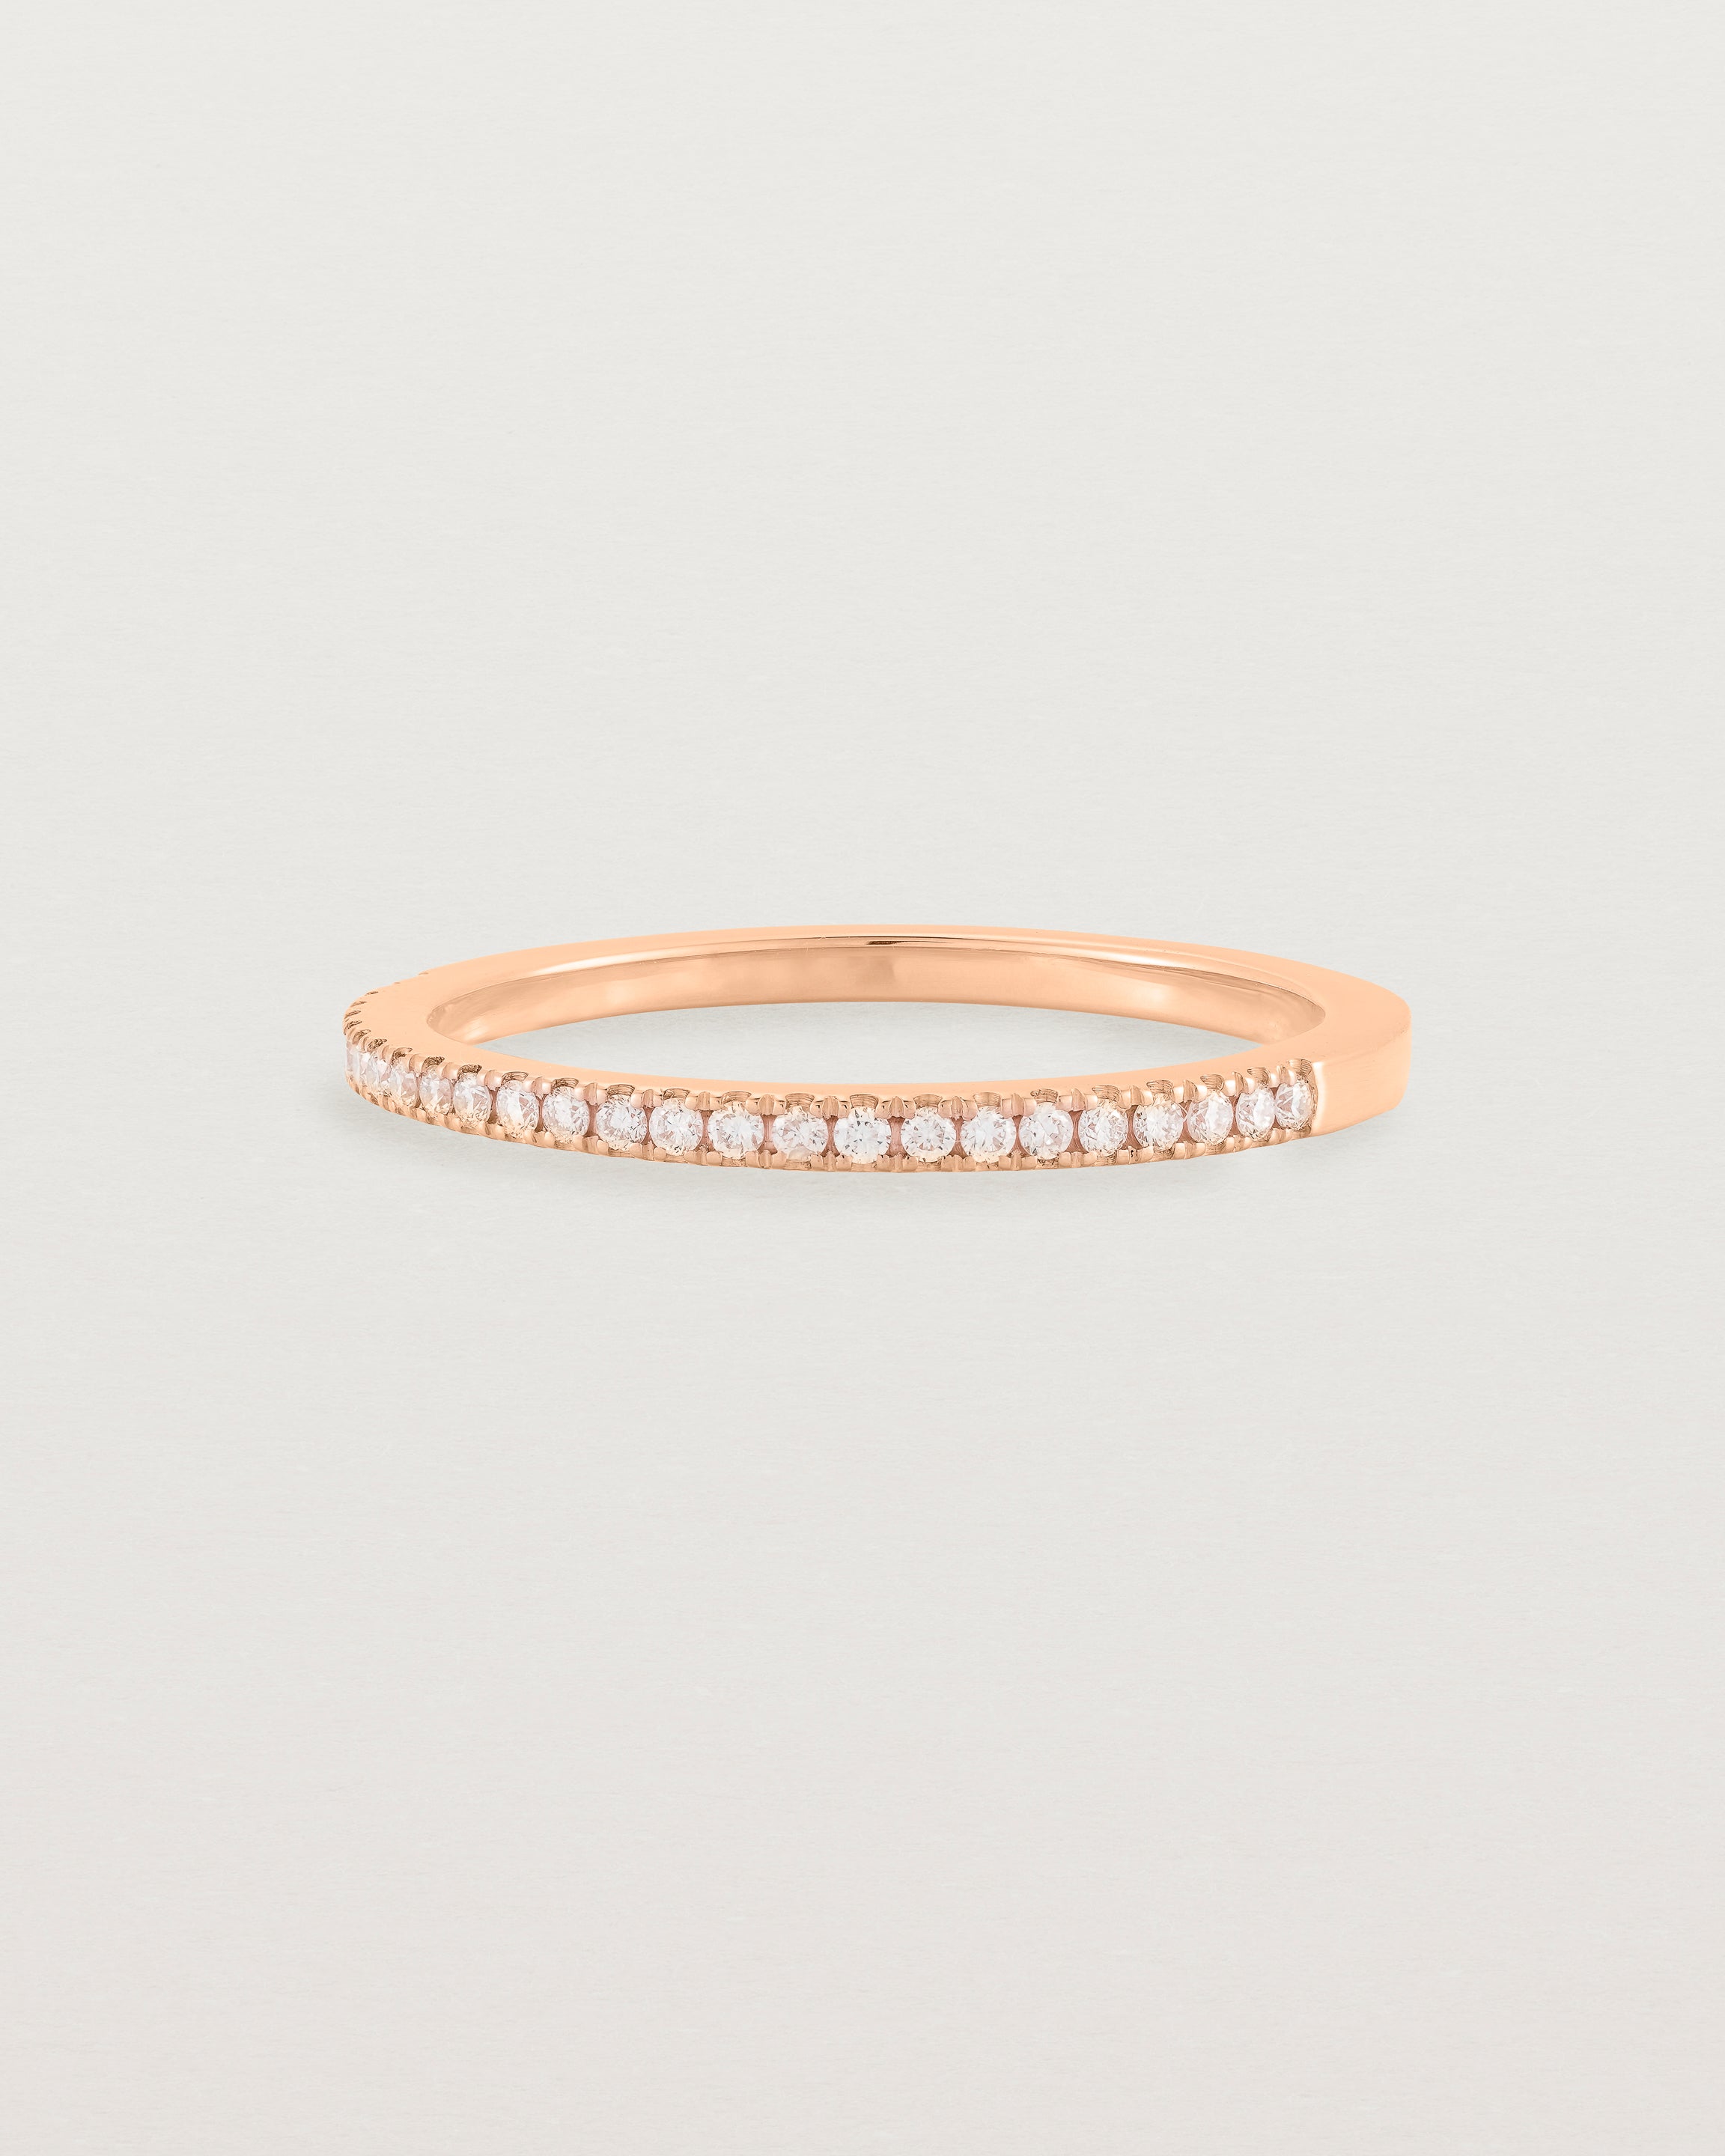 rose gold band with half a band of micro pave diamonds